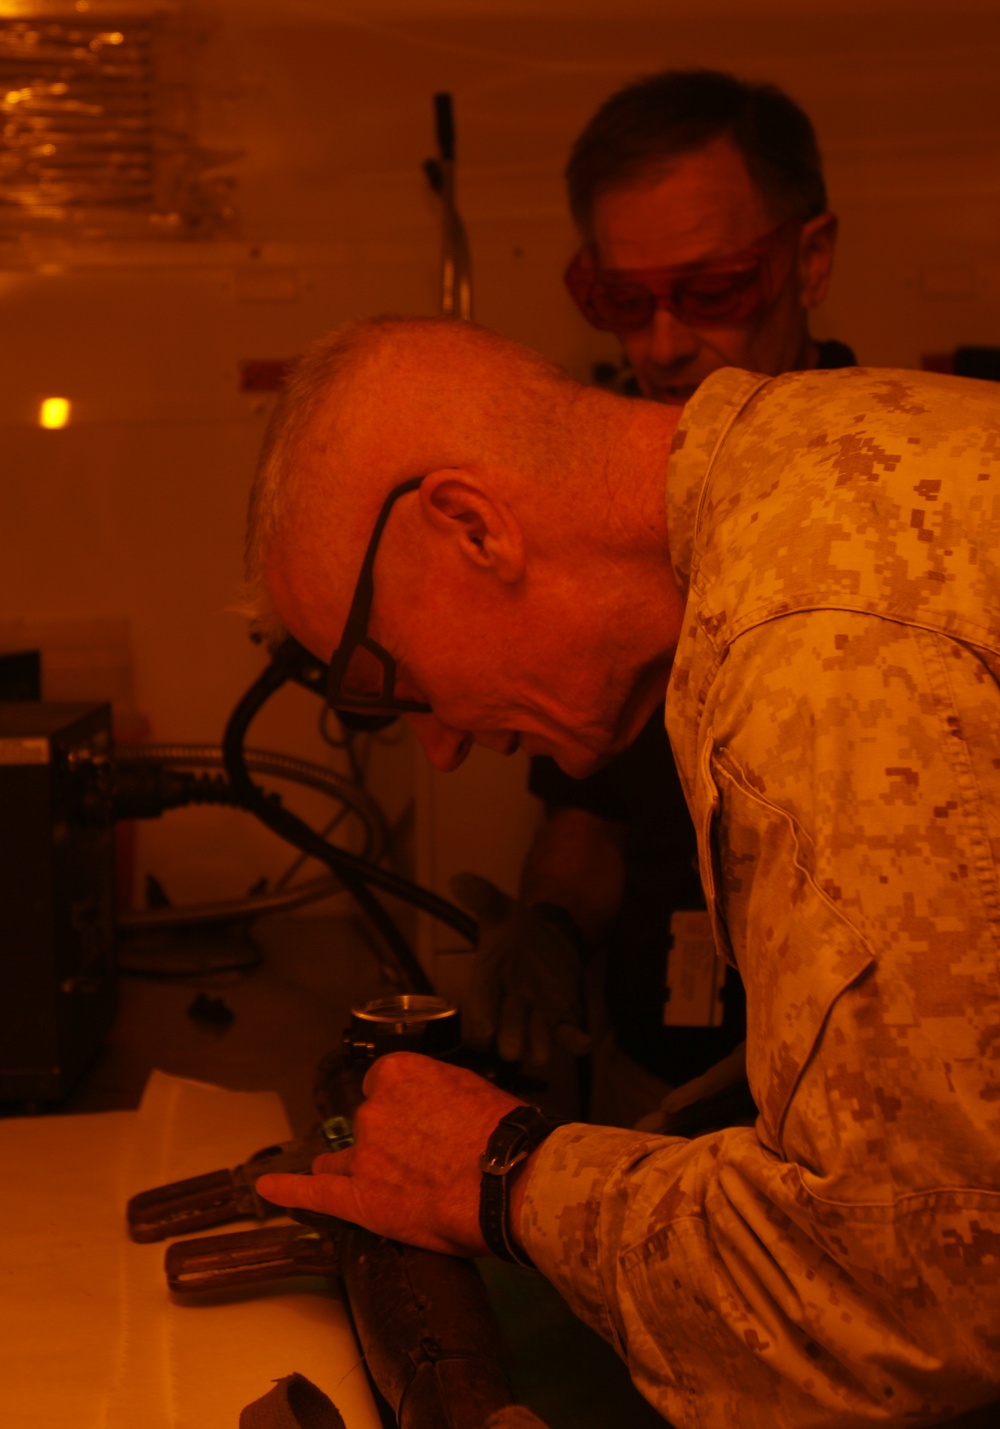 CSI Camp Leatherneck: Frontline forensics solve battlefield mysteries in Helmand province